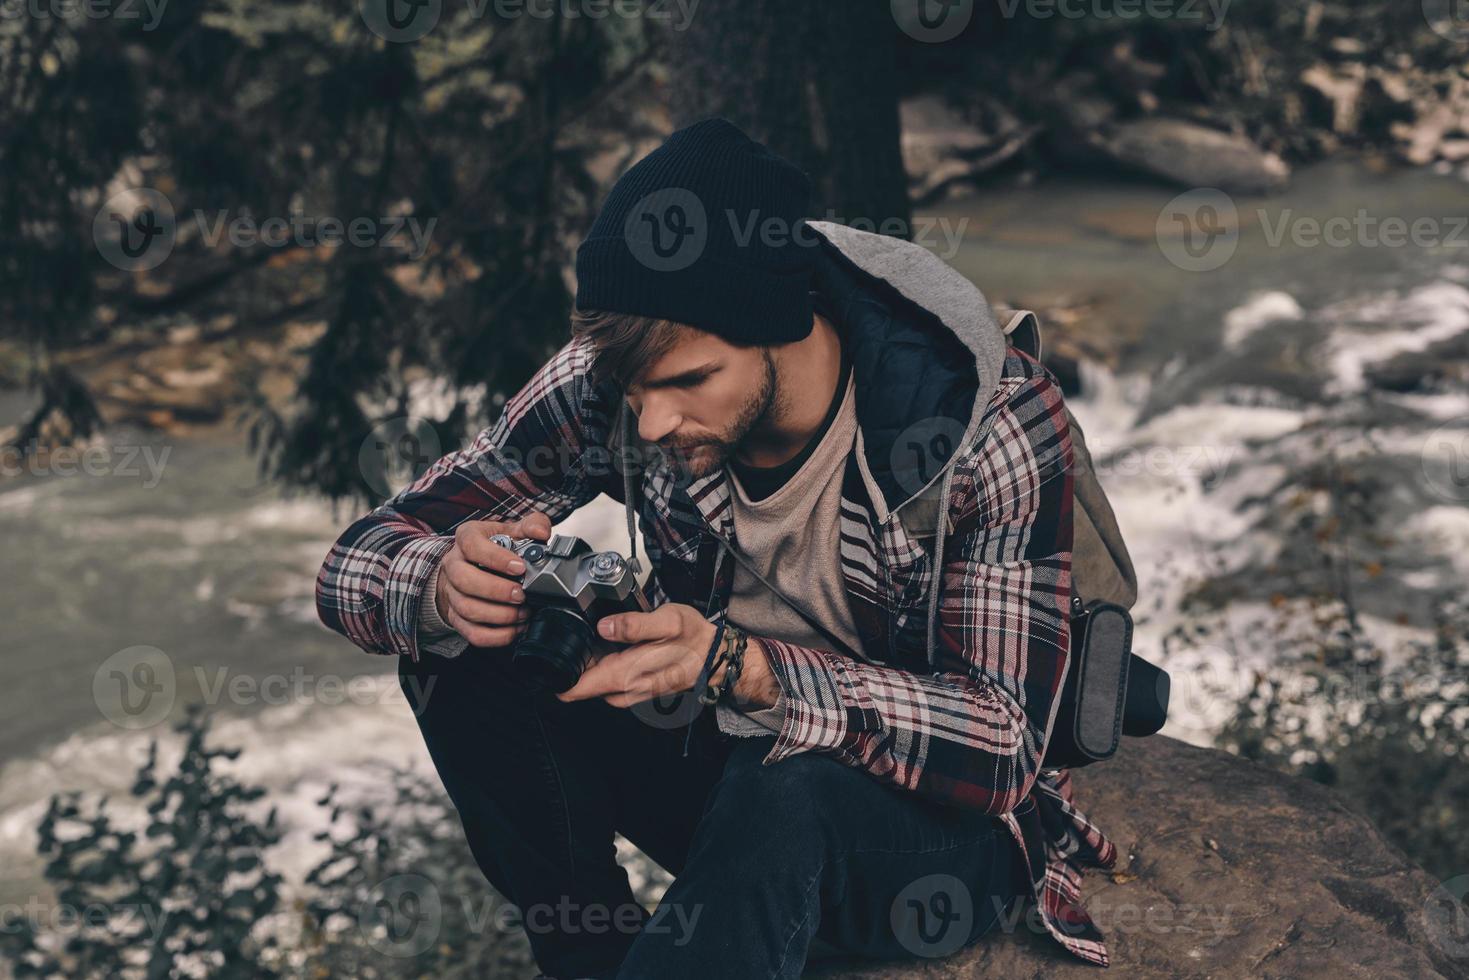 Always carrying camera. Young modern man with backpack holding a photo camera while sitting in the woods with river in background